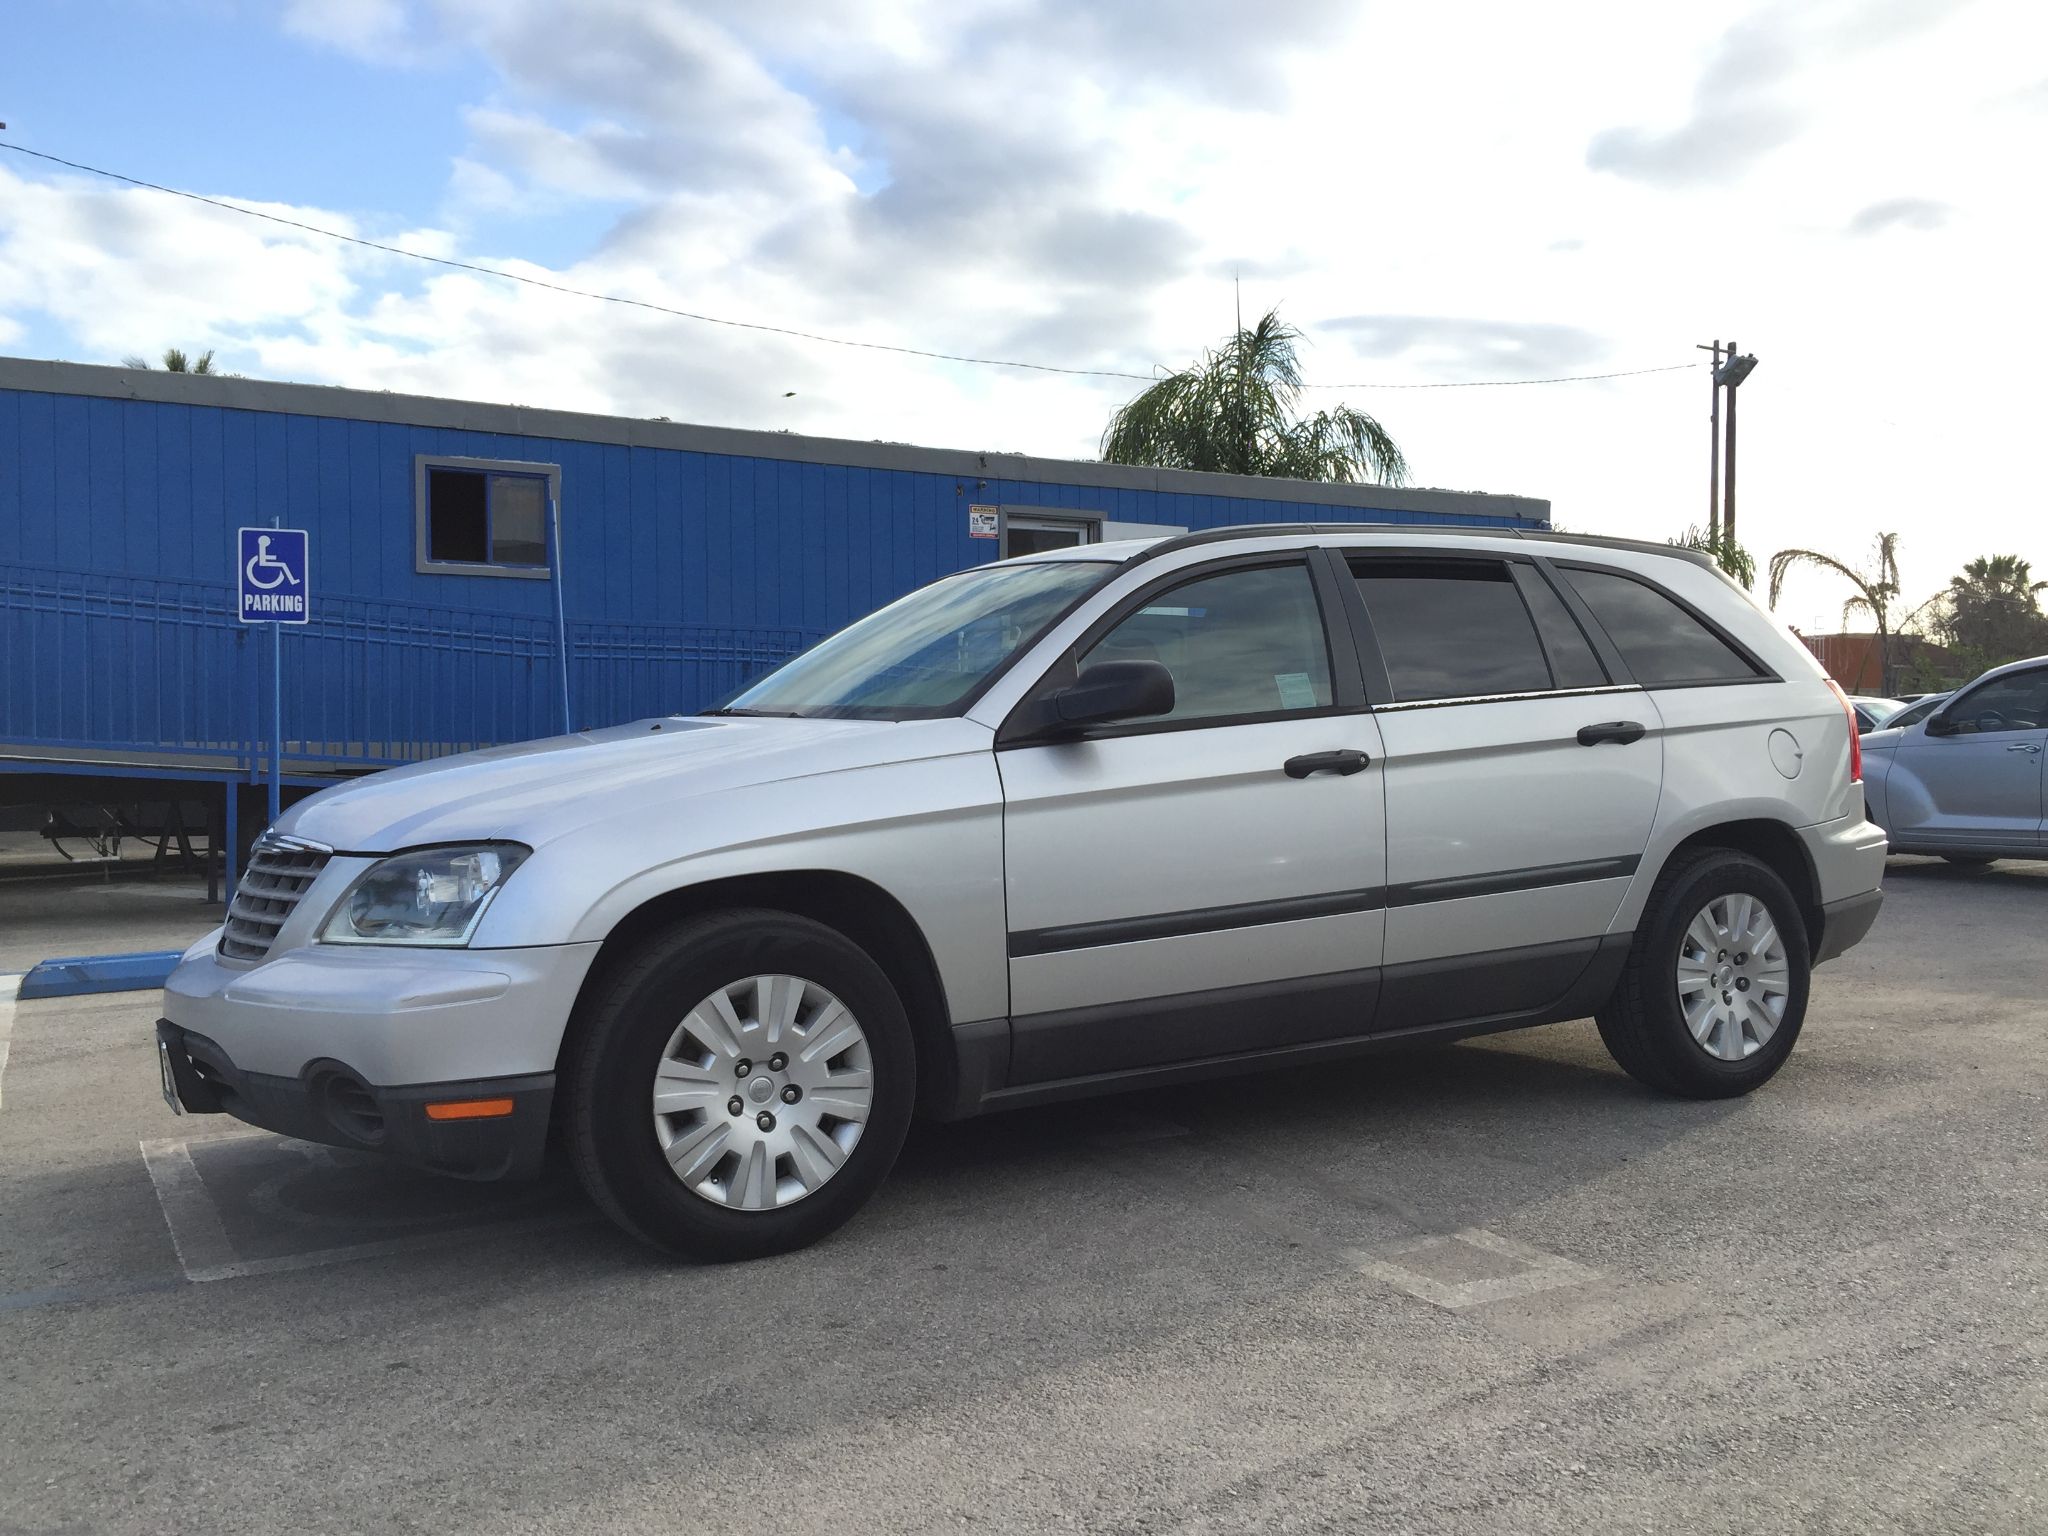 Used 2005 Chrysler Pacifica at City Cars Warehouse INC